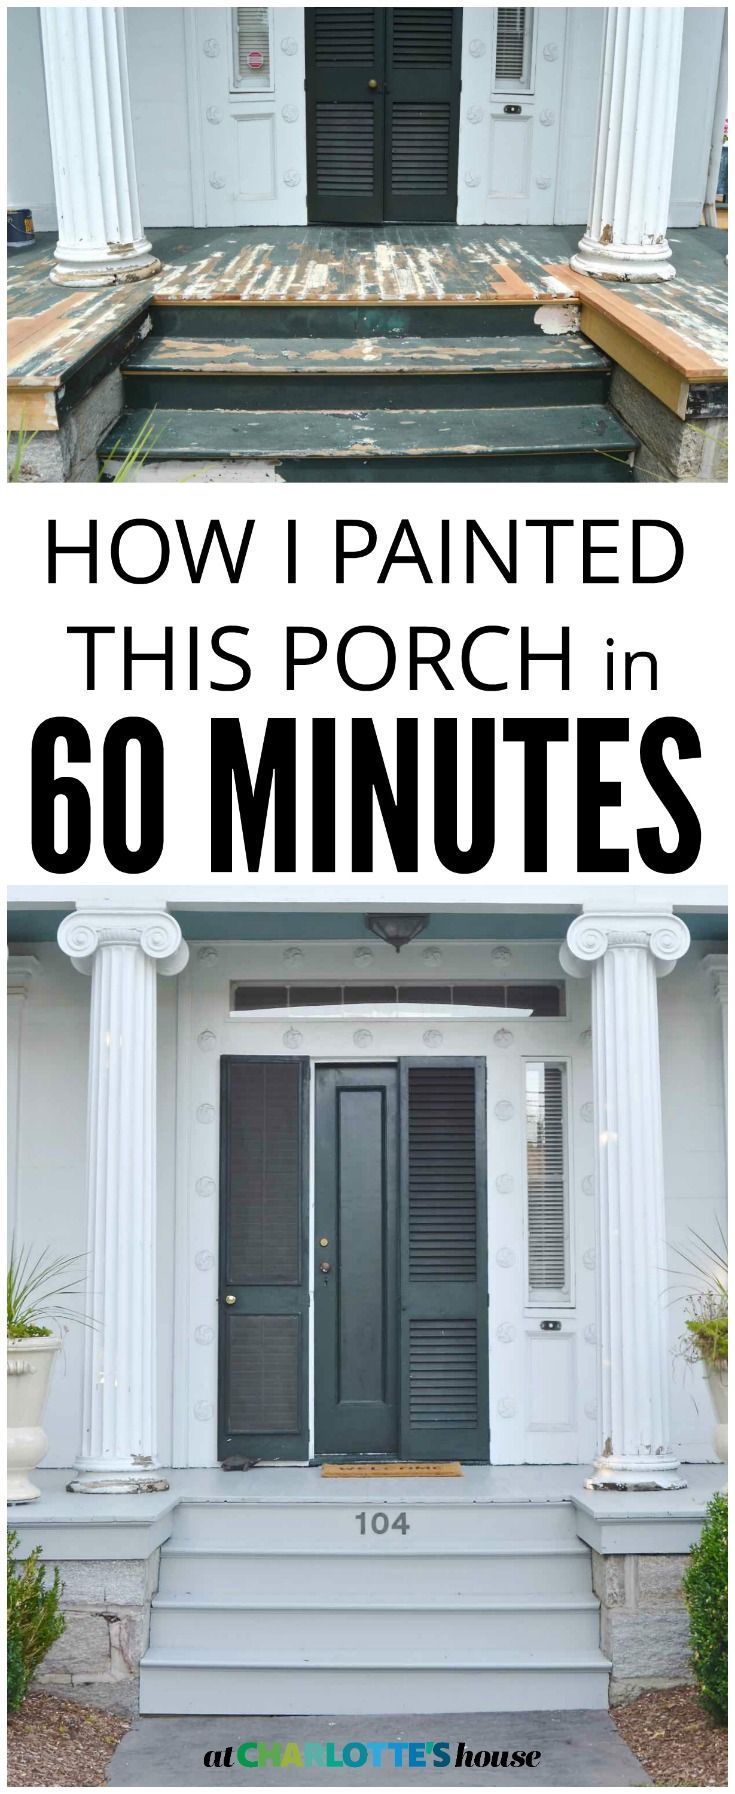 I Painted Our Porches! - At Charlotte's House